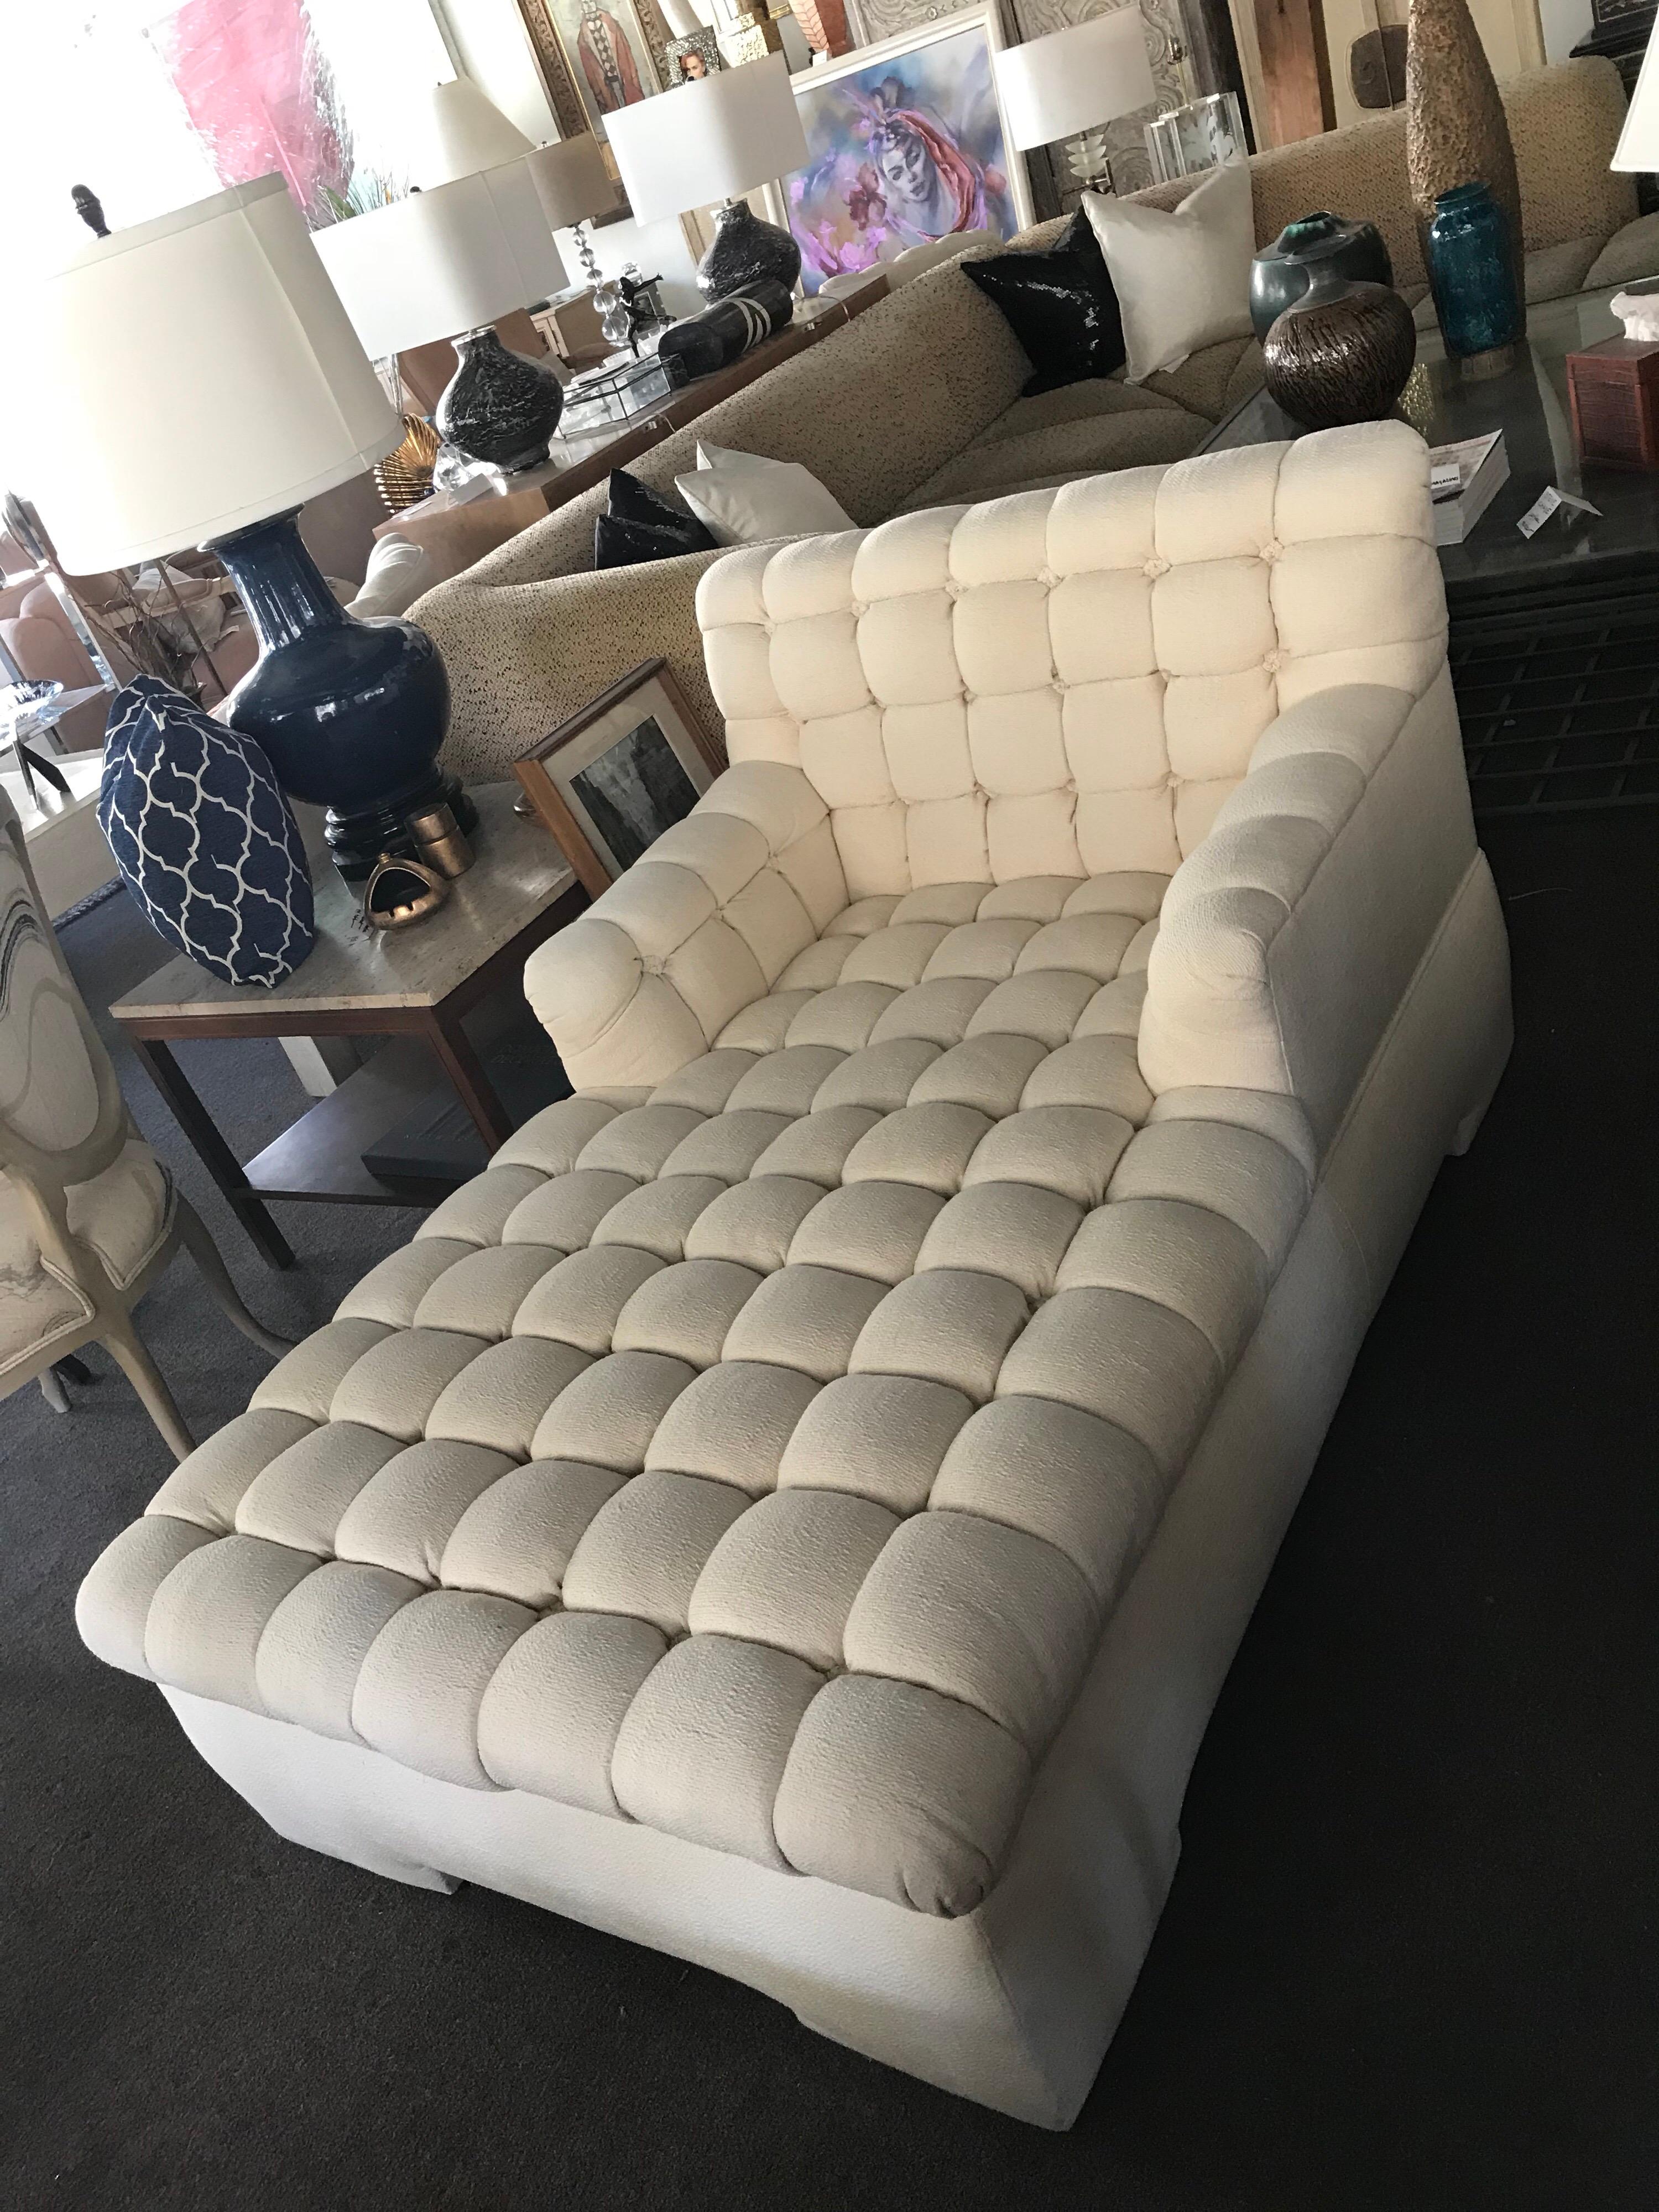 Rare Original Steve Chase Marshmallow Tufted Chaise Lounge Made by A. Rudin 2